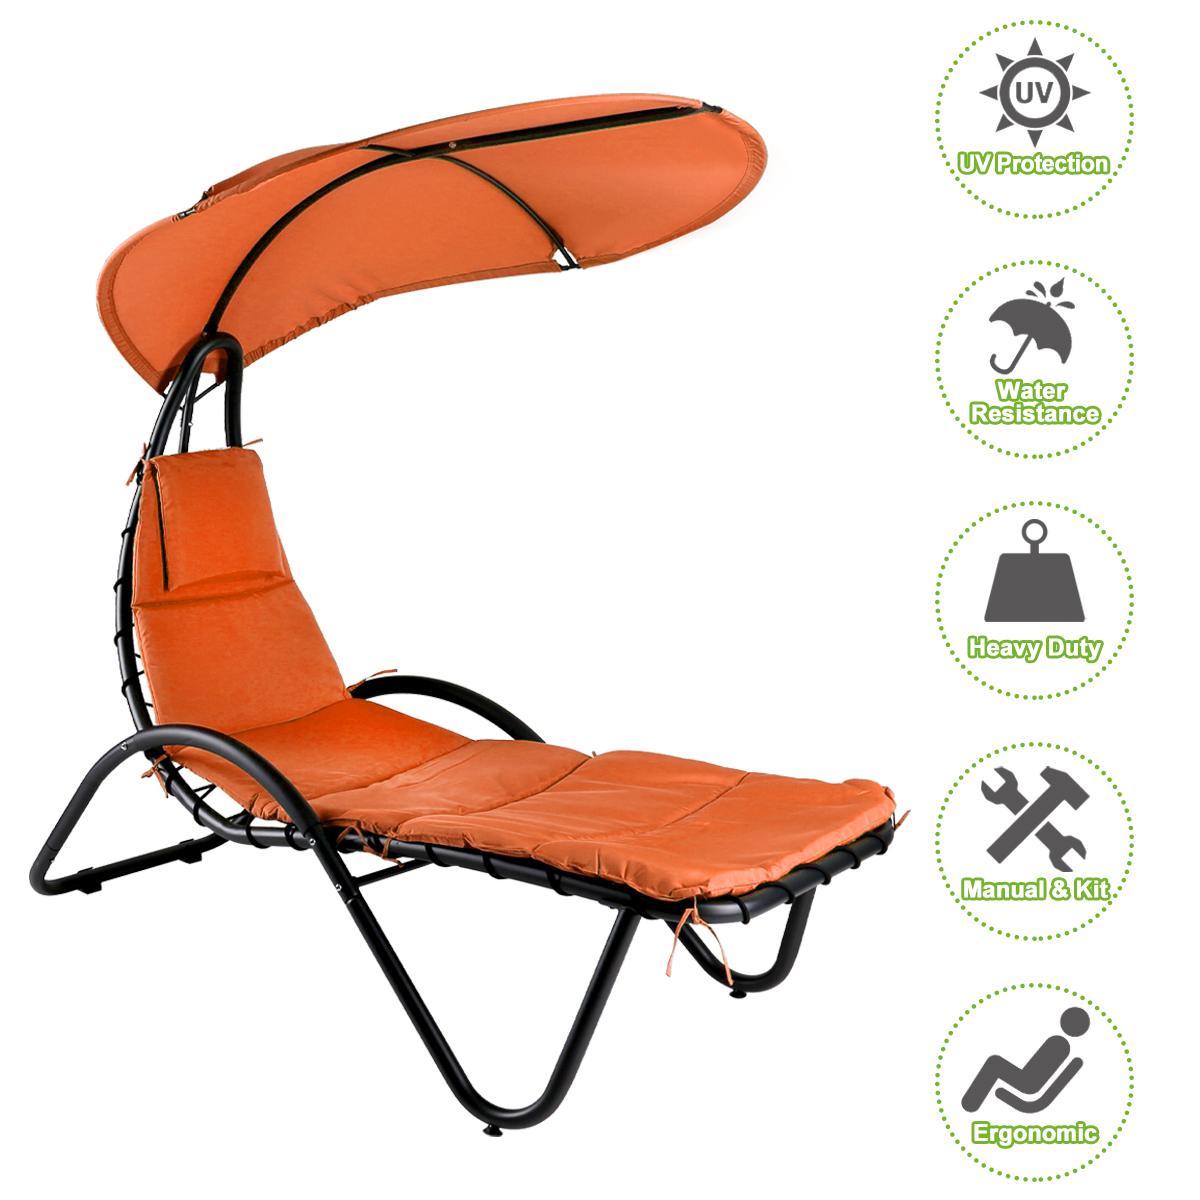 Hanging Chaise Lounger Chair Patio Porch Arc Swing Hammock Chair Canopy Outdoor [Orange] - image 3 of 8